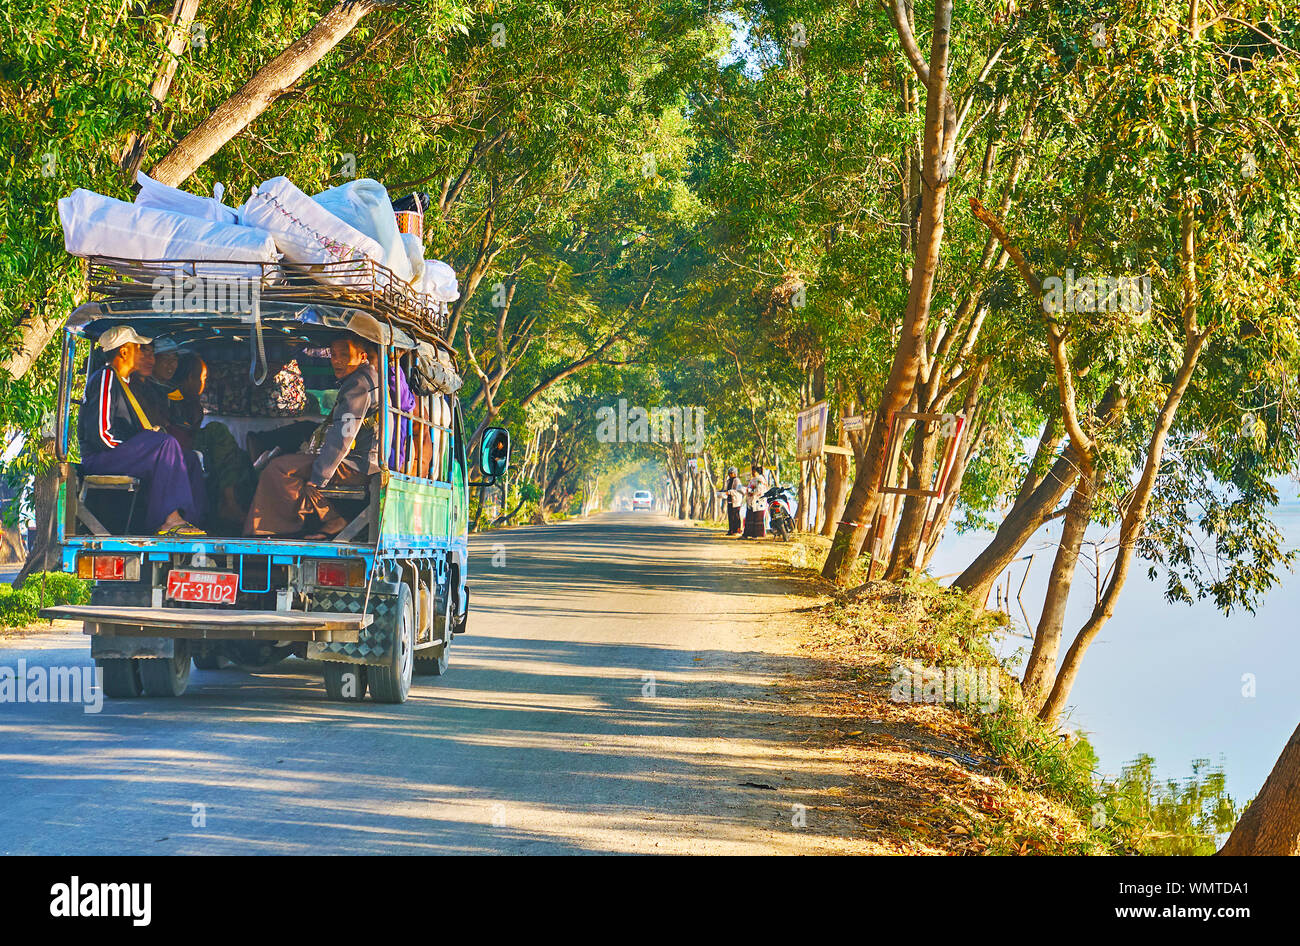 NYAUNGSHWE, MYANMAR - FEBRUARY 20, 2018: The road in scenic natural location at Tharzi pond with lush green trees on both sides and riding truck with Stock Photo